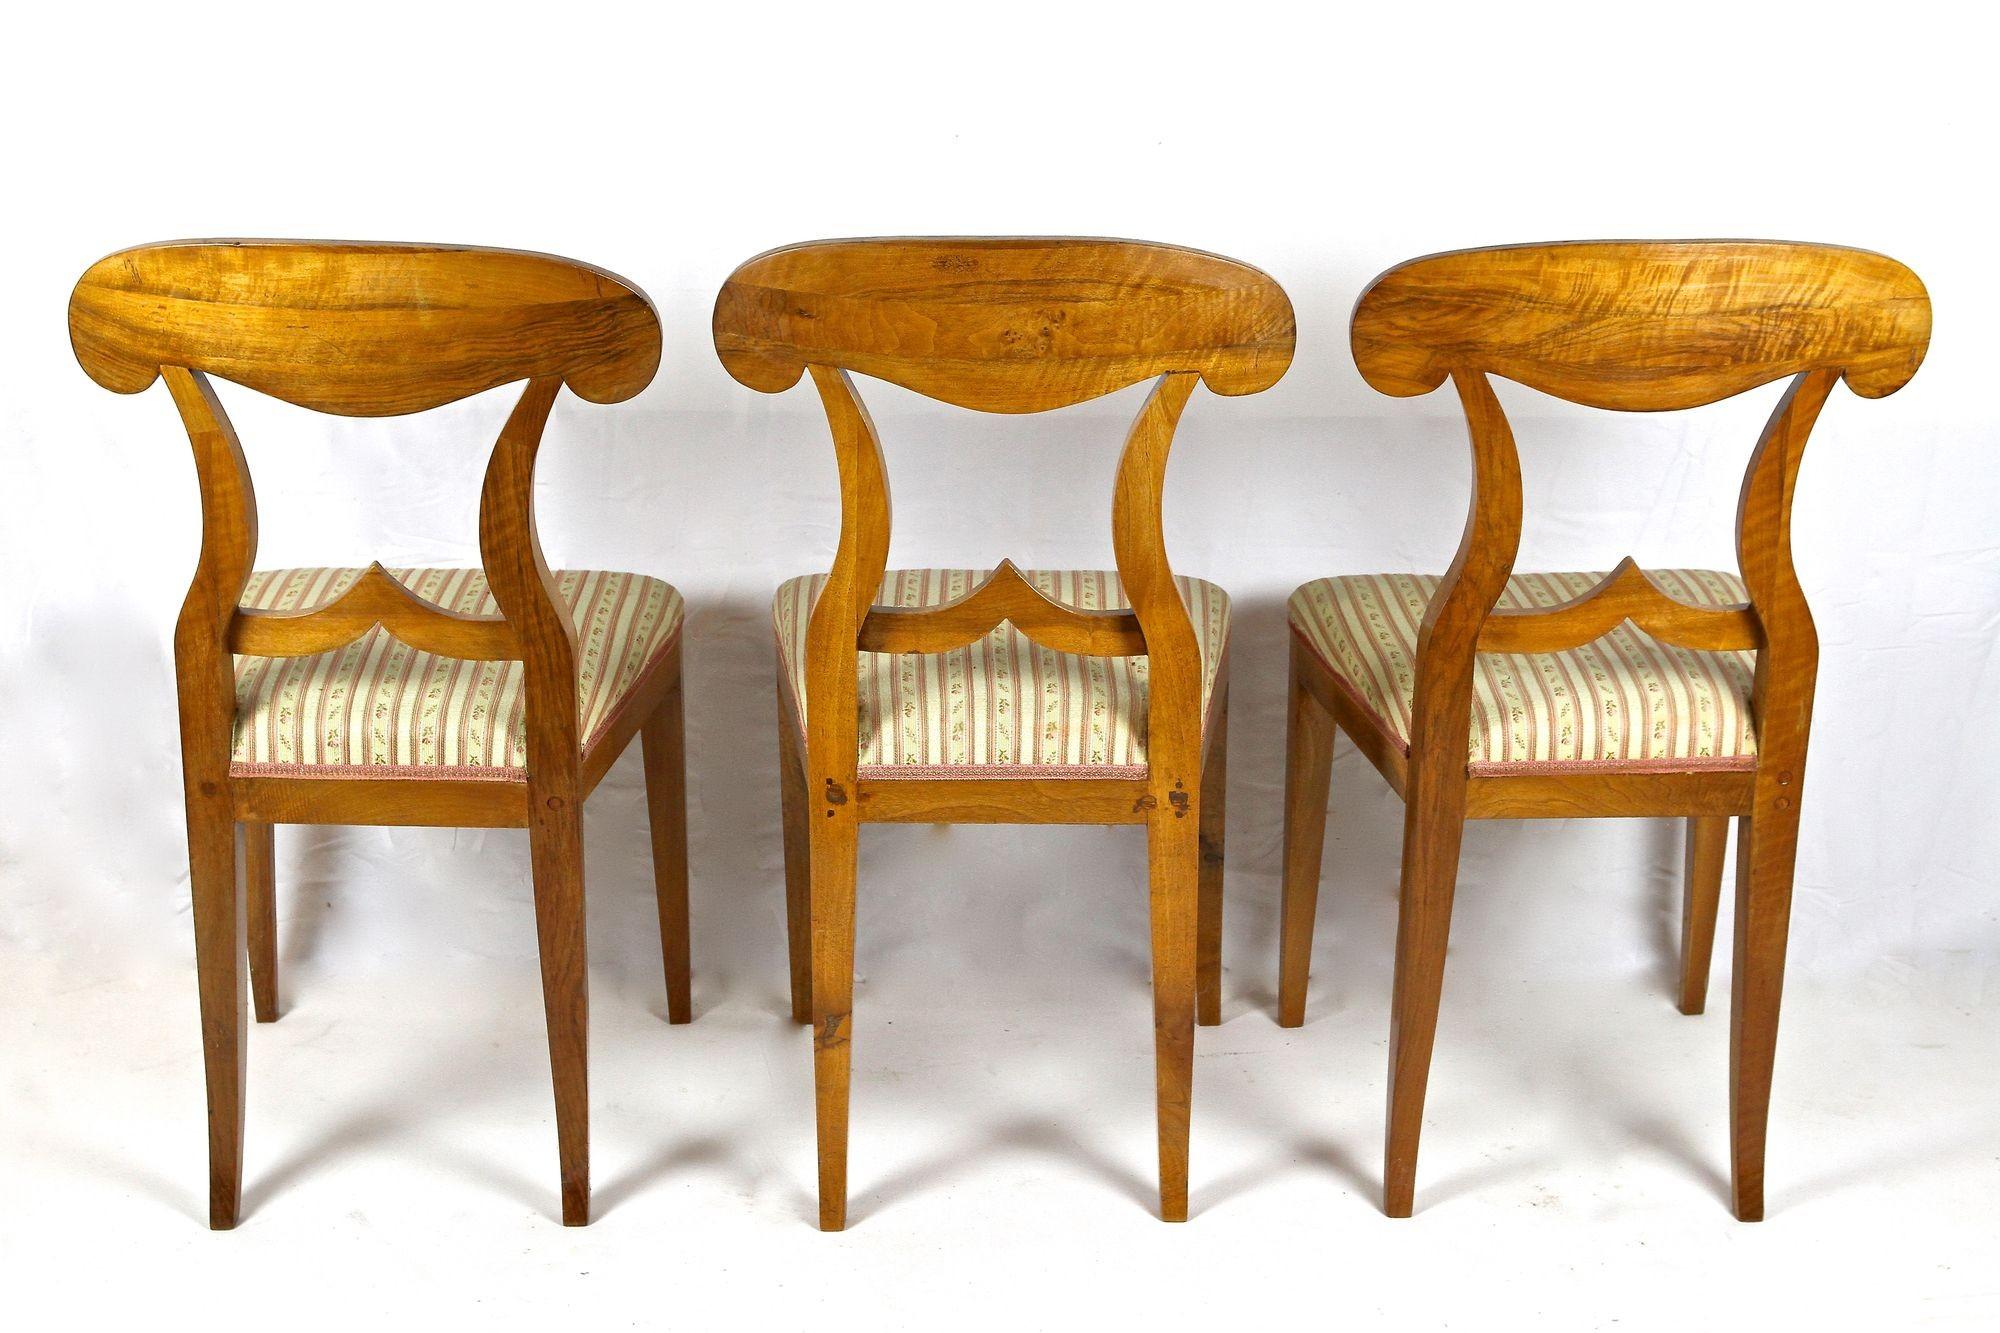 Set Of 6 Biedermeier Nutwood Shovel Dining Chairs, 19th Century, AT ca. 1830 For Sale 6